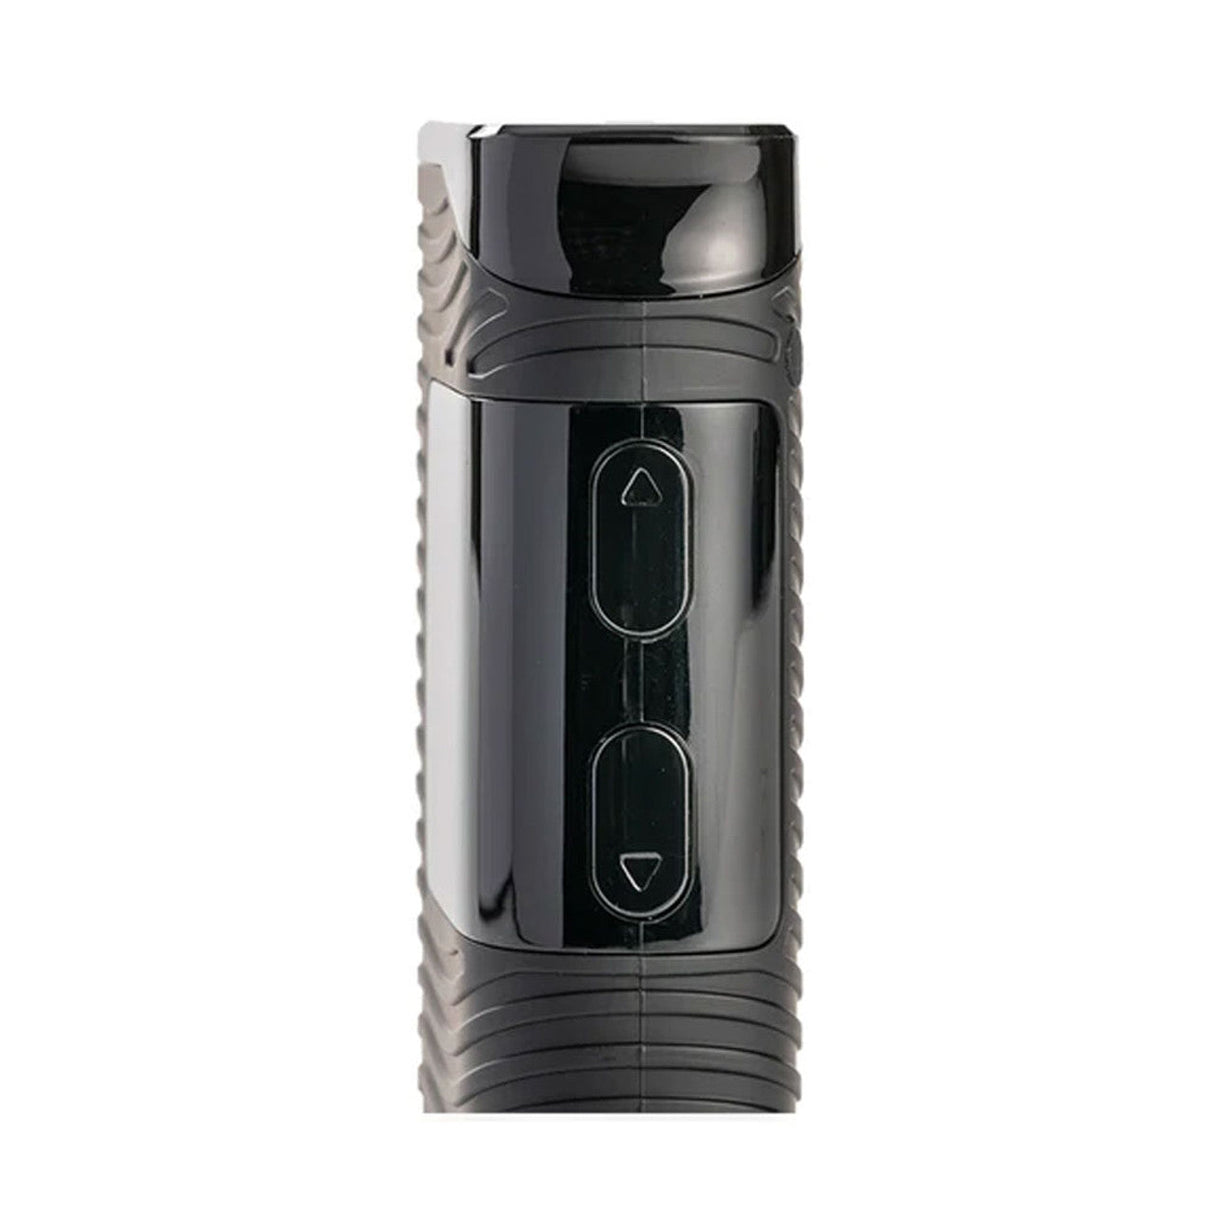 Boundless CFX+ Vaporizer front view on white background, portable with digital display